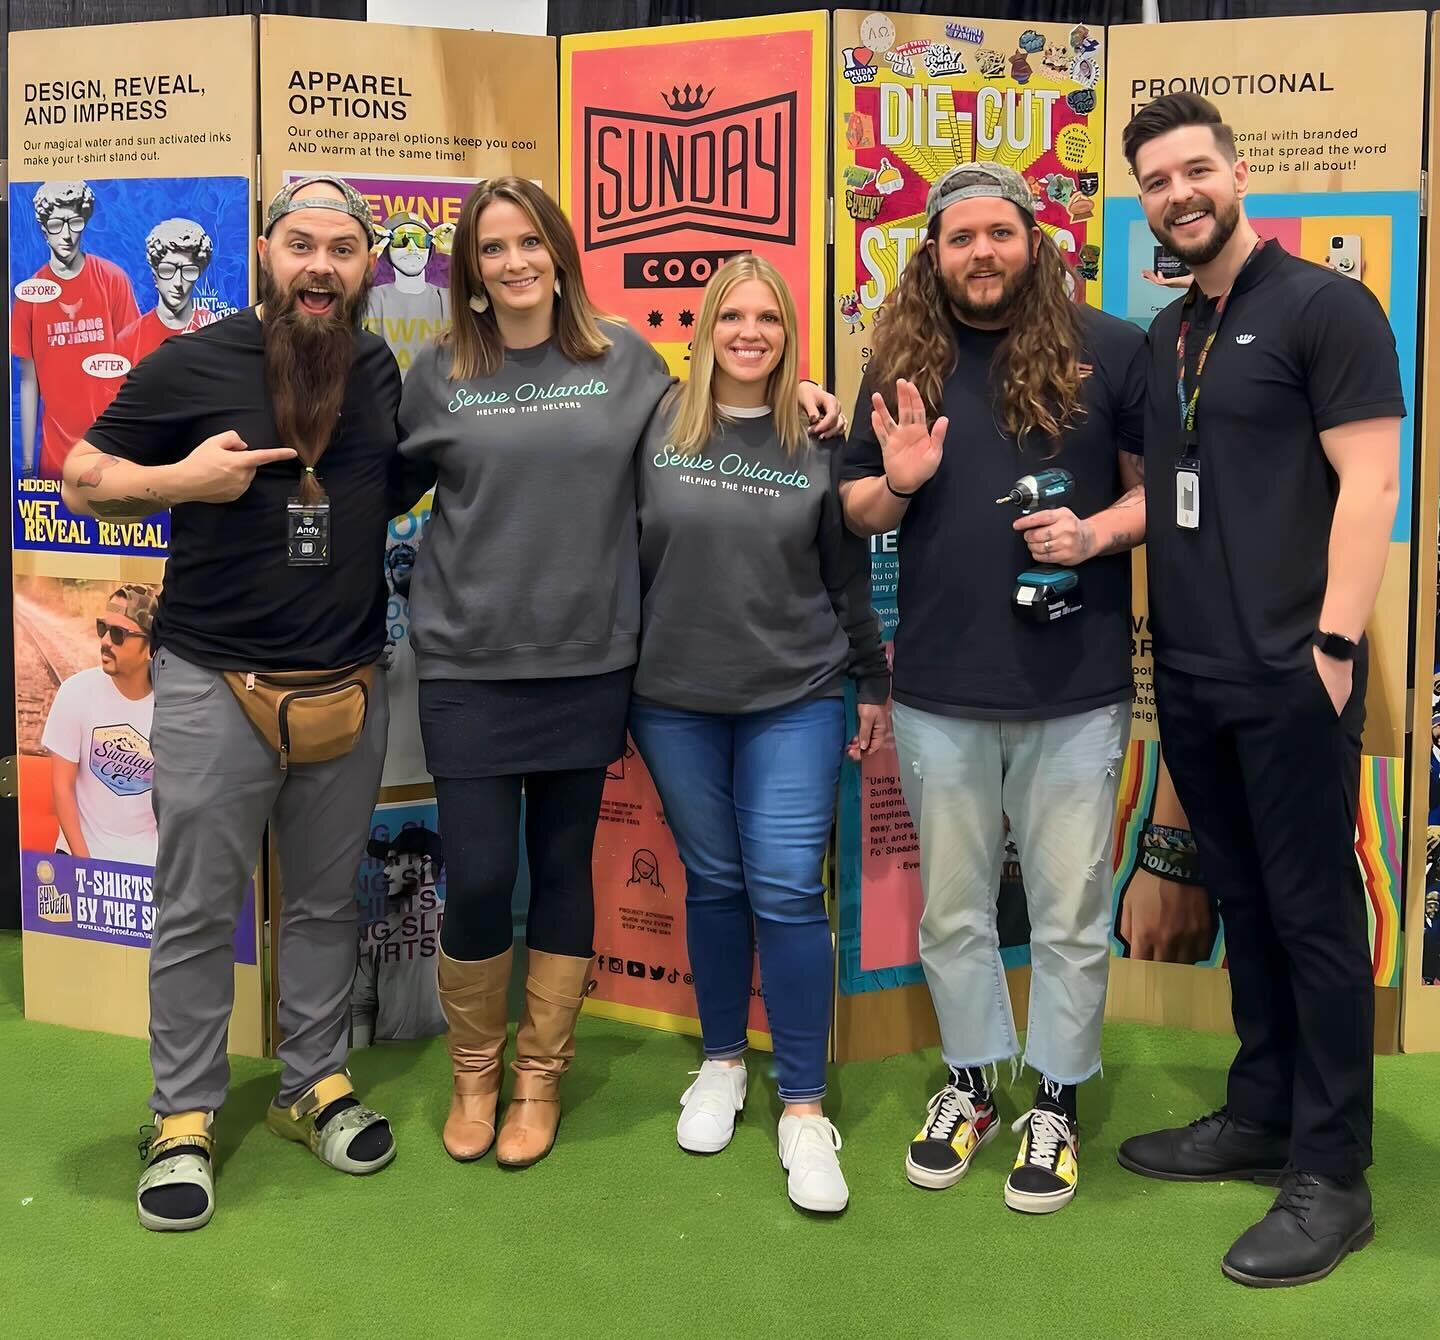 It was great to see our friends from @sundaycooltees at @ymconclave! If you&rsquo;re not getting your t-shirts, sweatshirts and swag from them you&rsquo;re missing out!